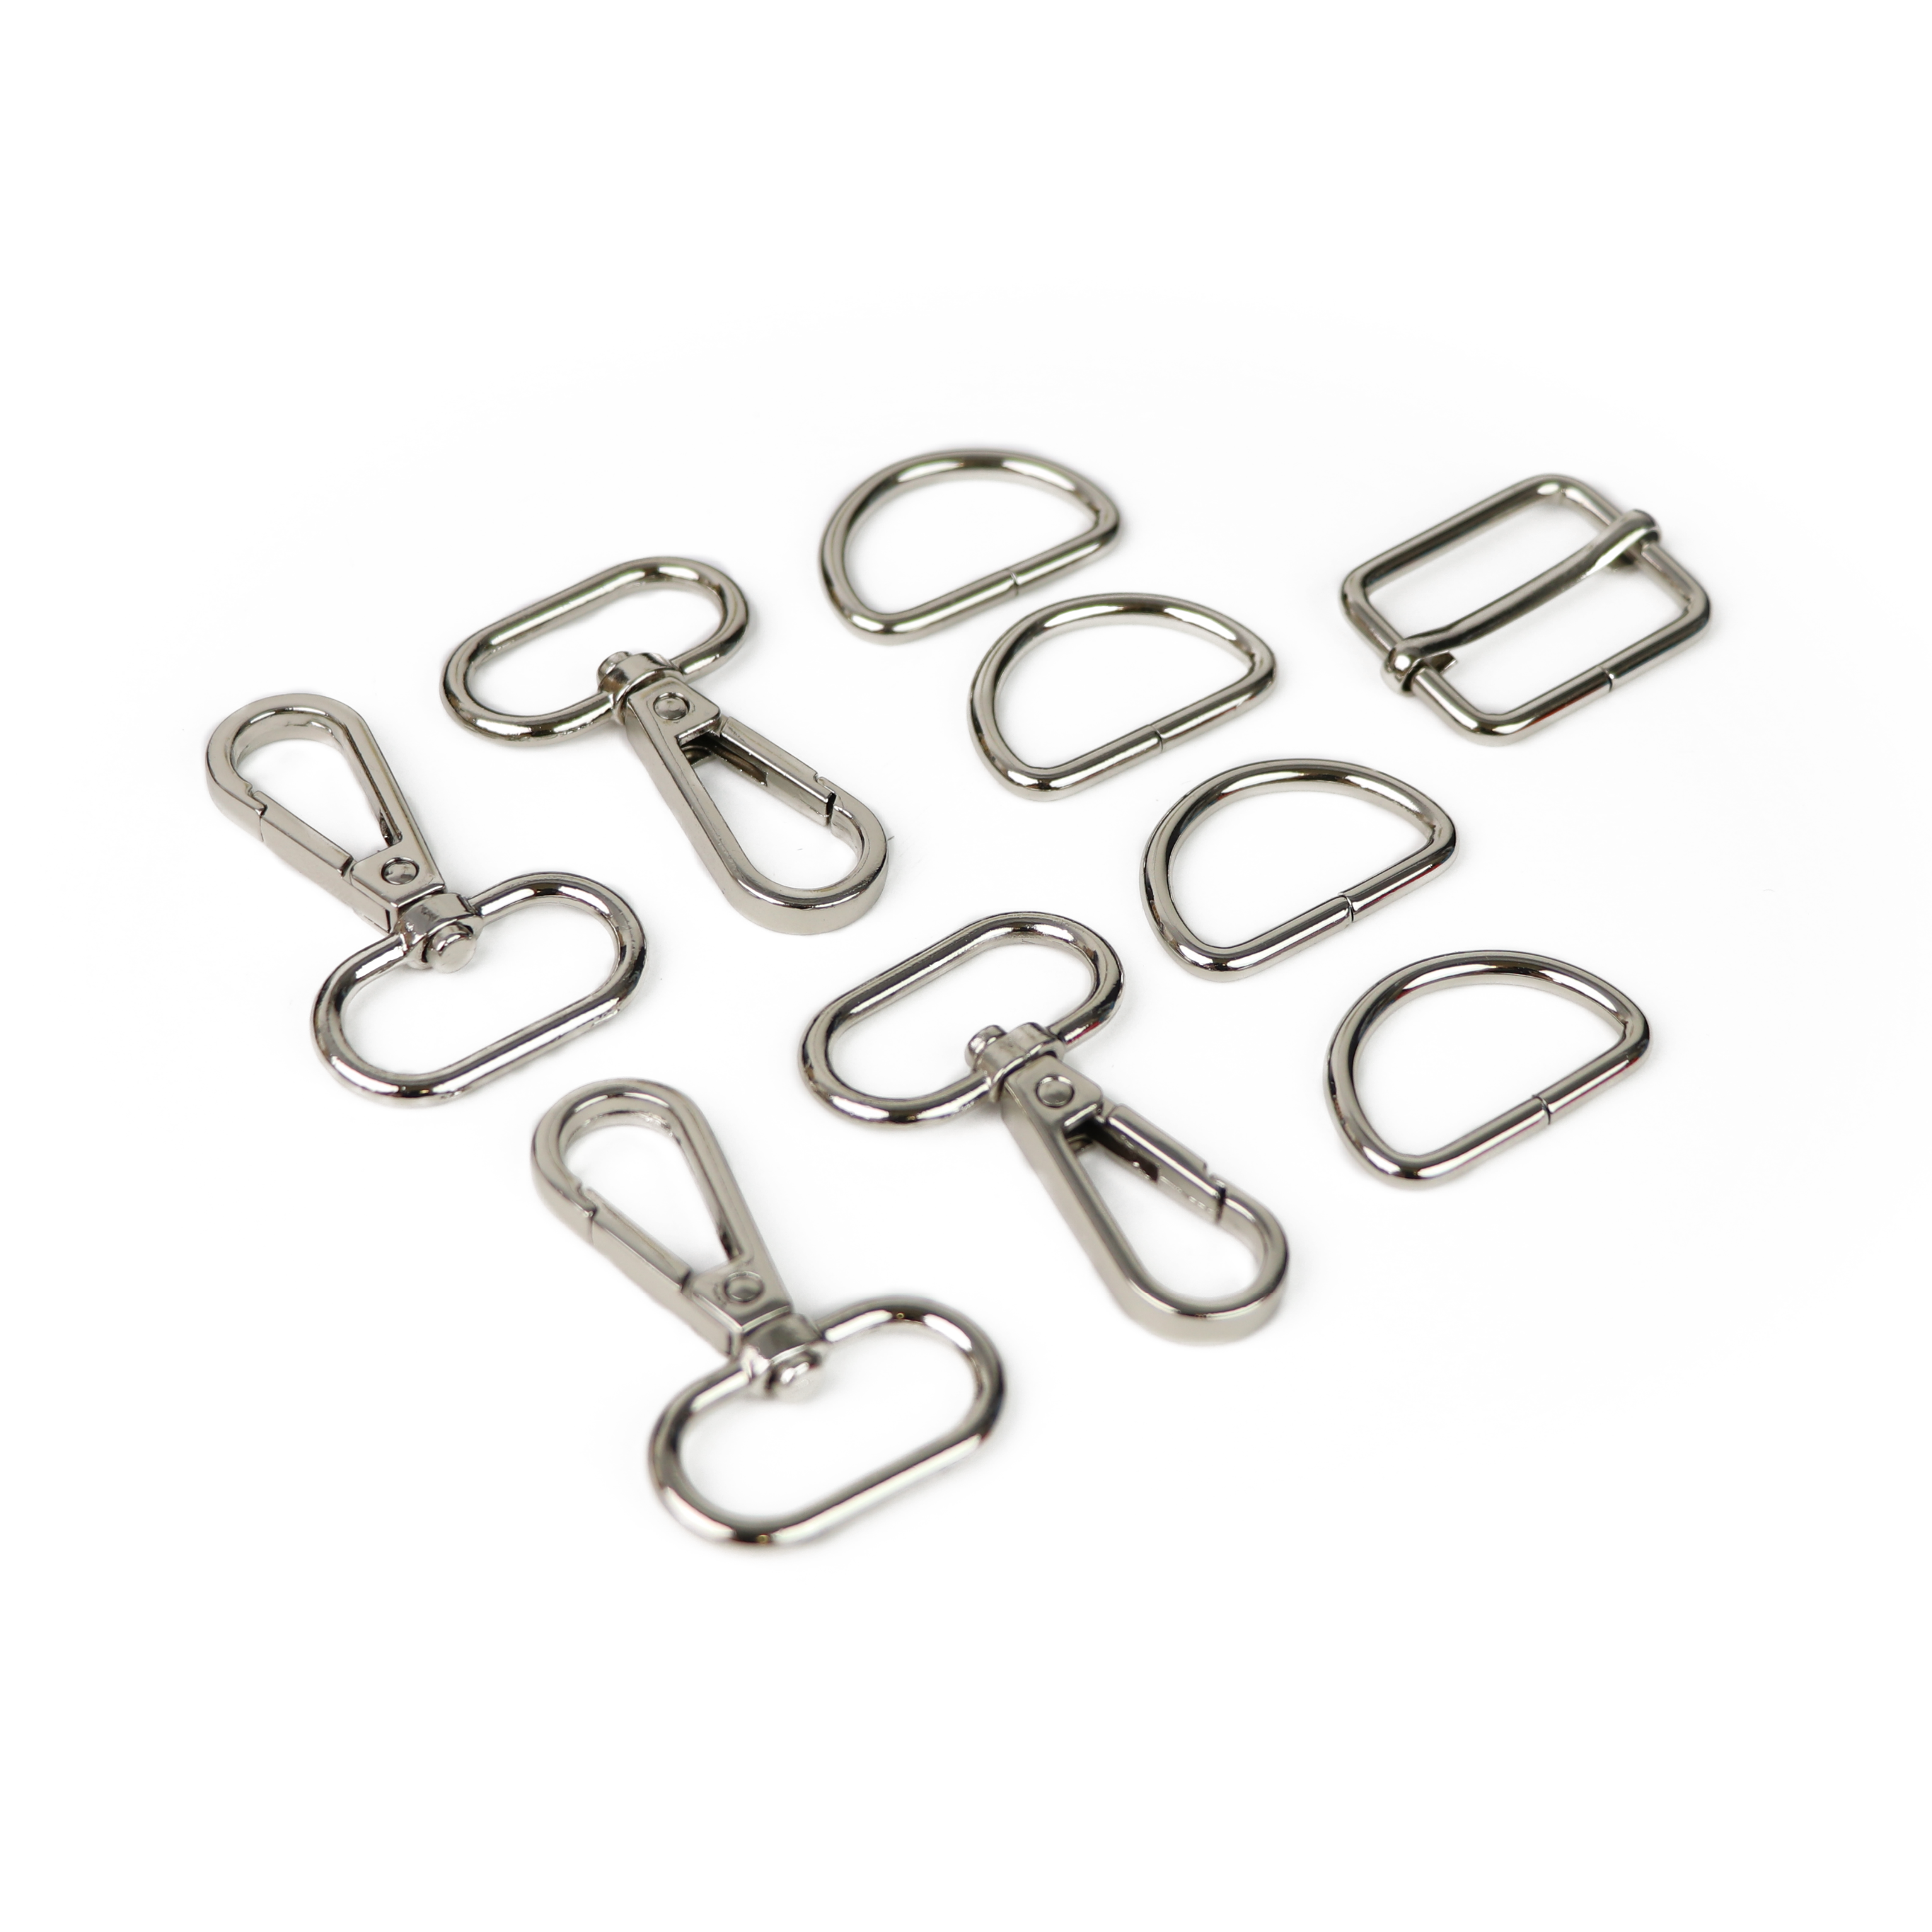 56 Pieces D Rings for Purse Bag Hardware Purse Hardware for Bag Making  Buckles Craft (Black,25 mm)